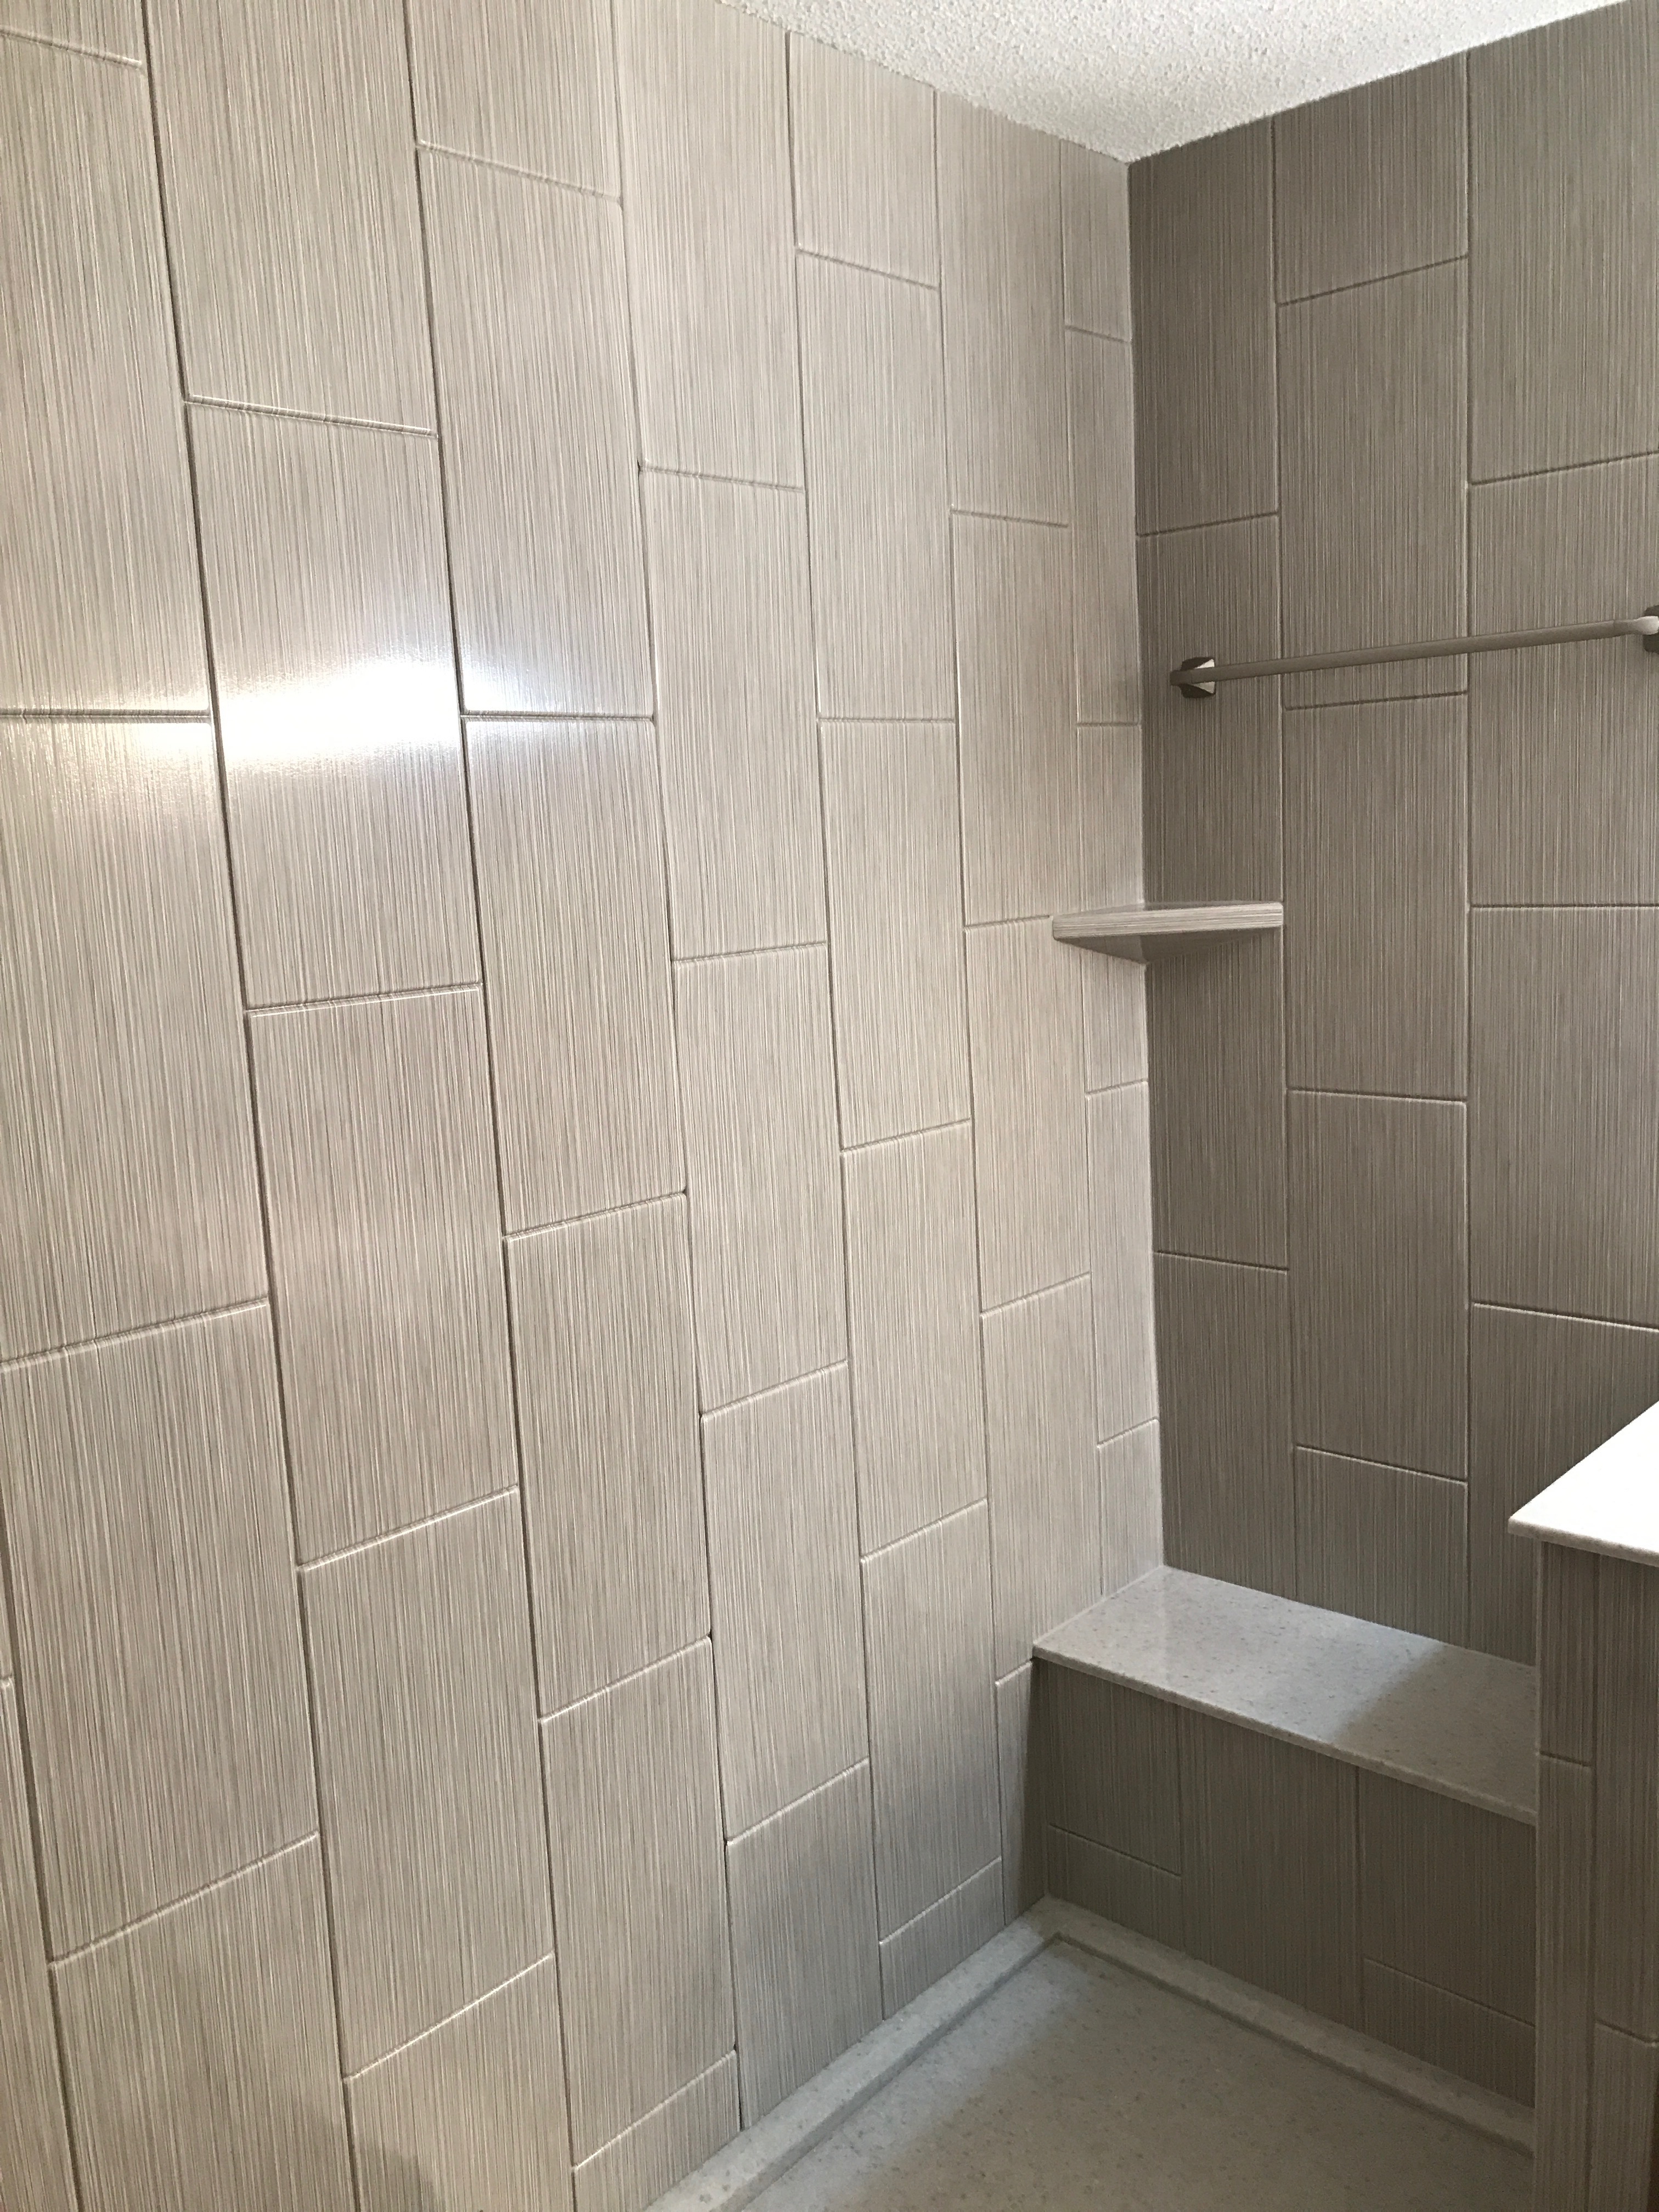 Walk-in Shower, Brushed Linen 10x20 Subway with Brushed Nickel Fixtures